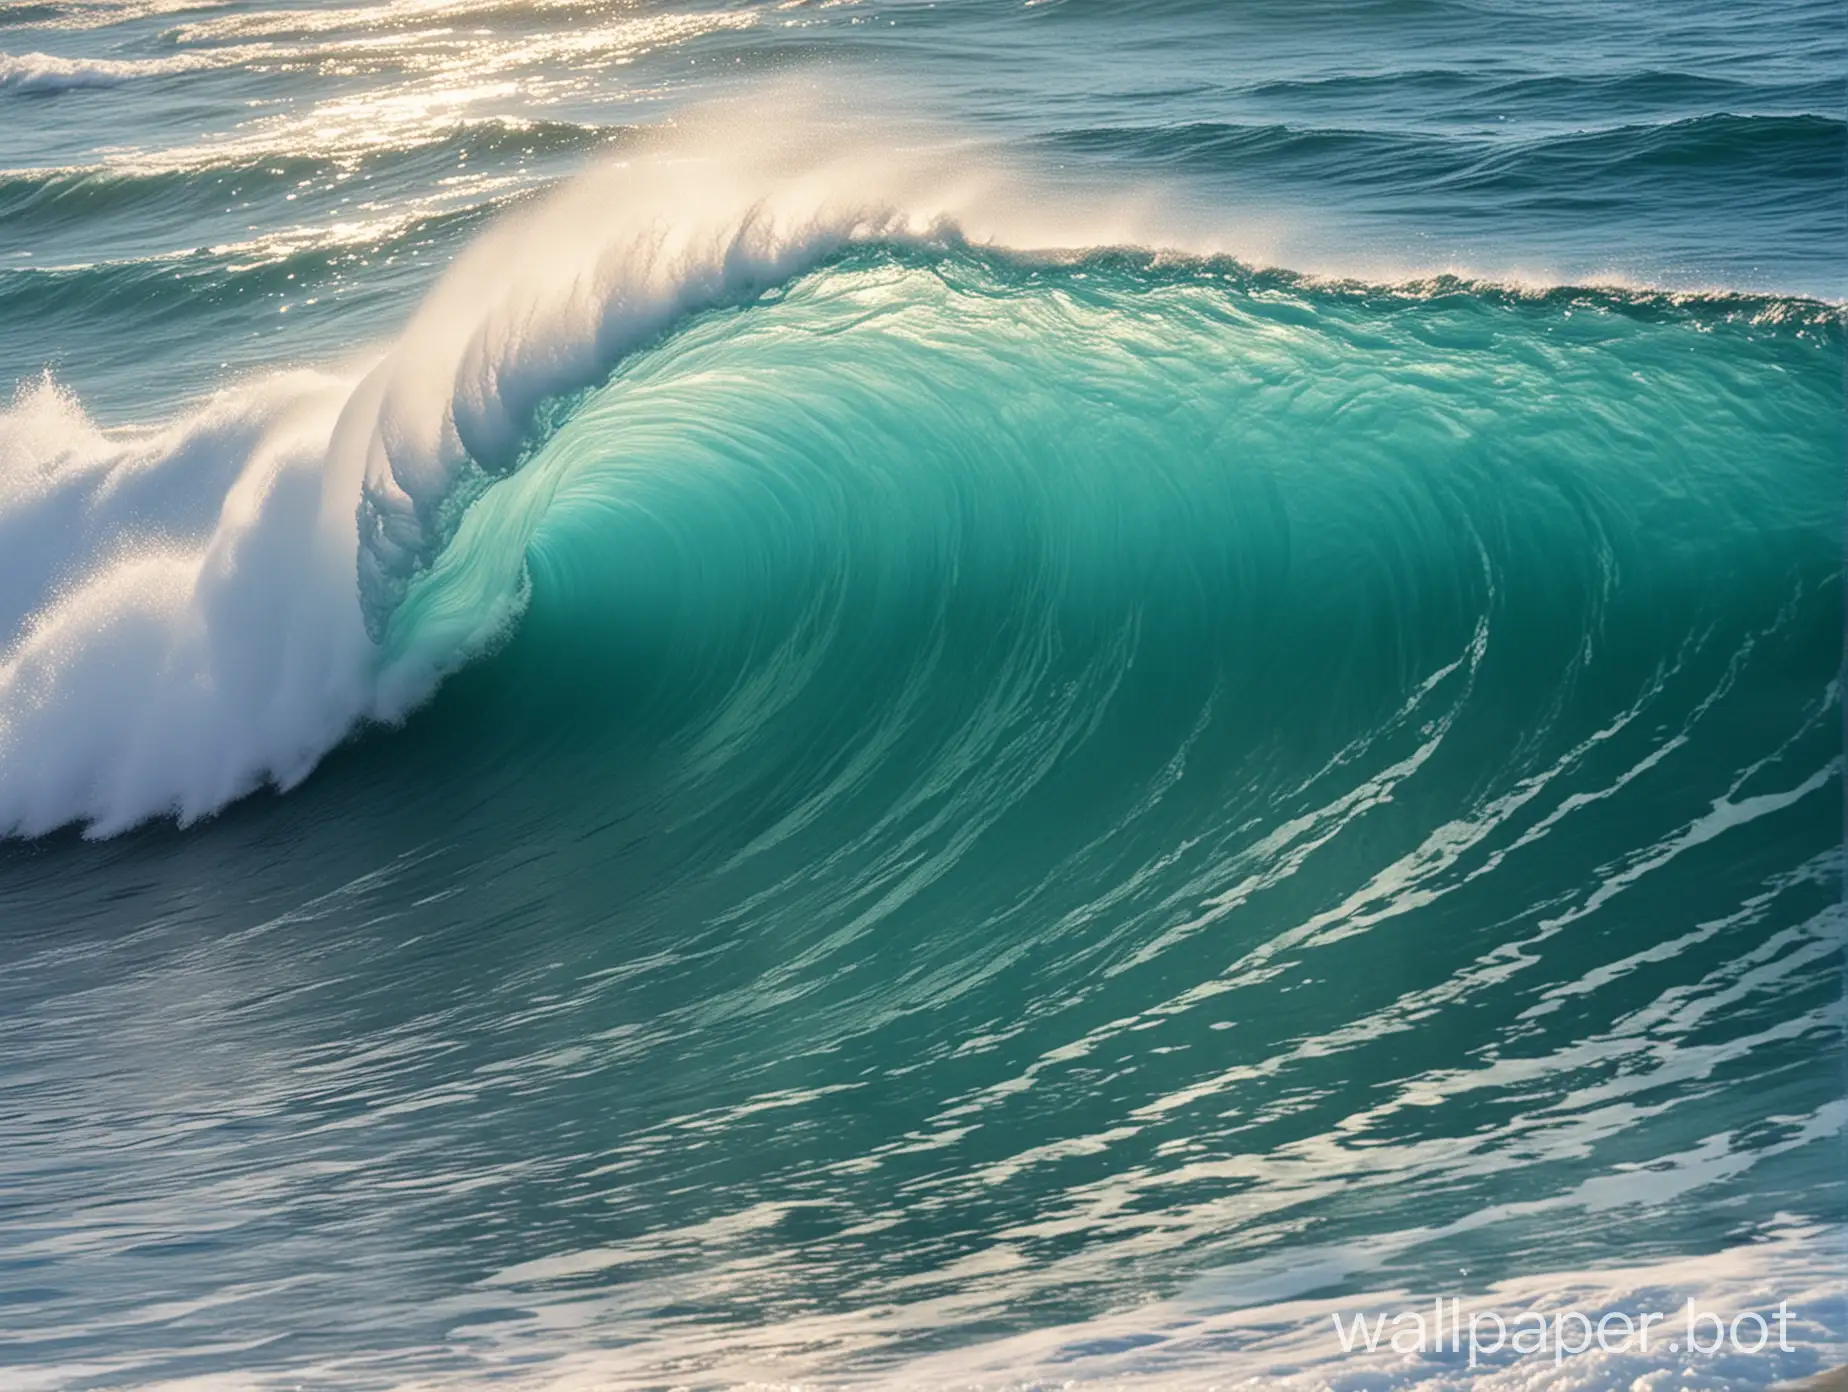 The ocean wave is a very beautiful color of turquoise, blue, and azure.